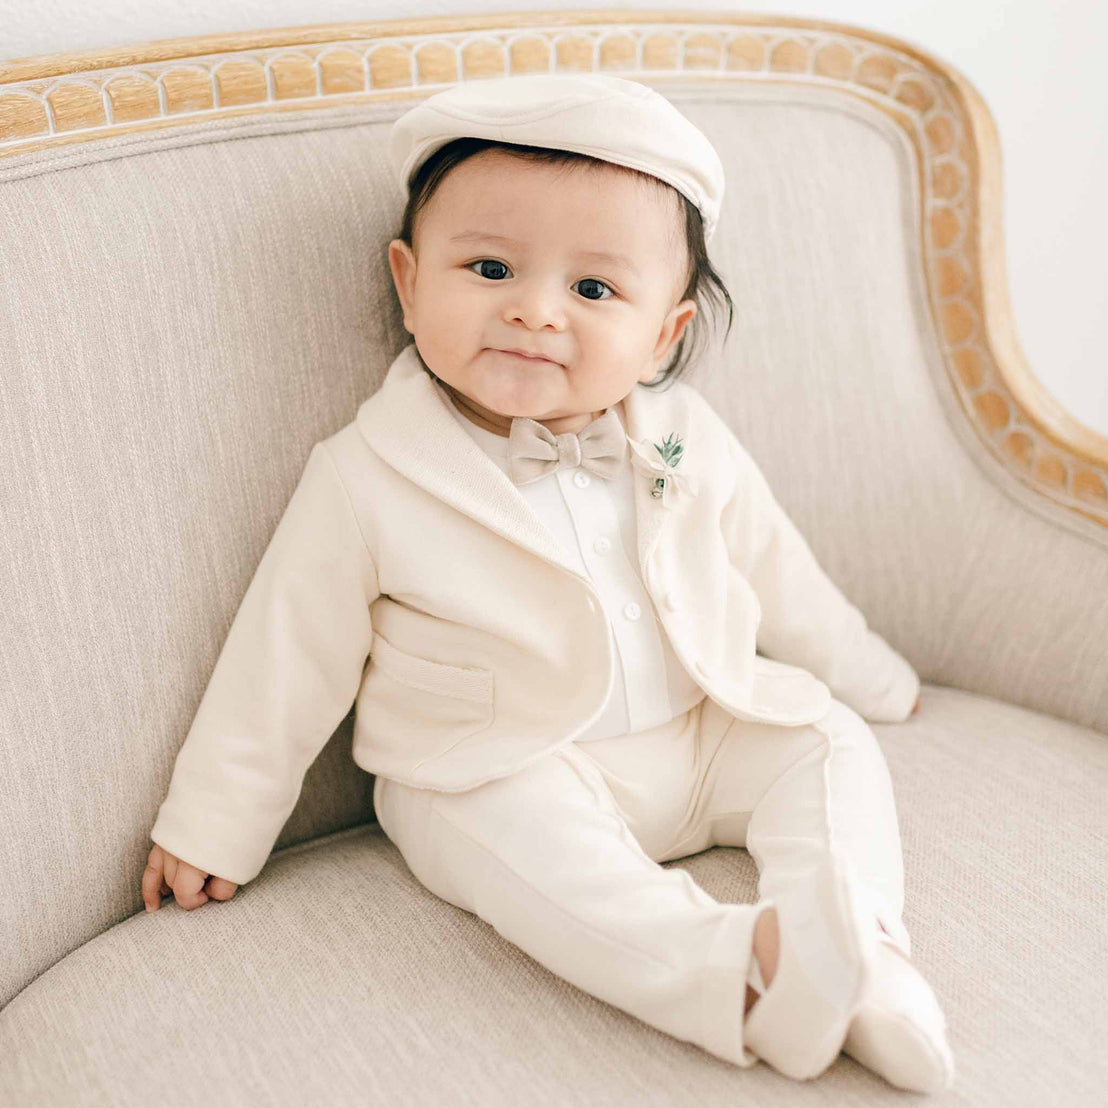 Baby boy sitting tan baptism suit, hat and booties